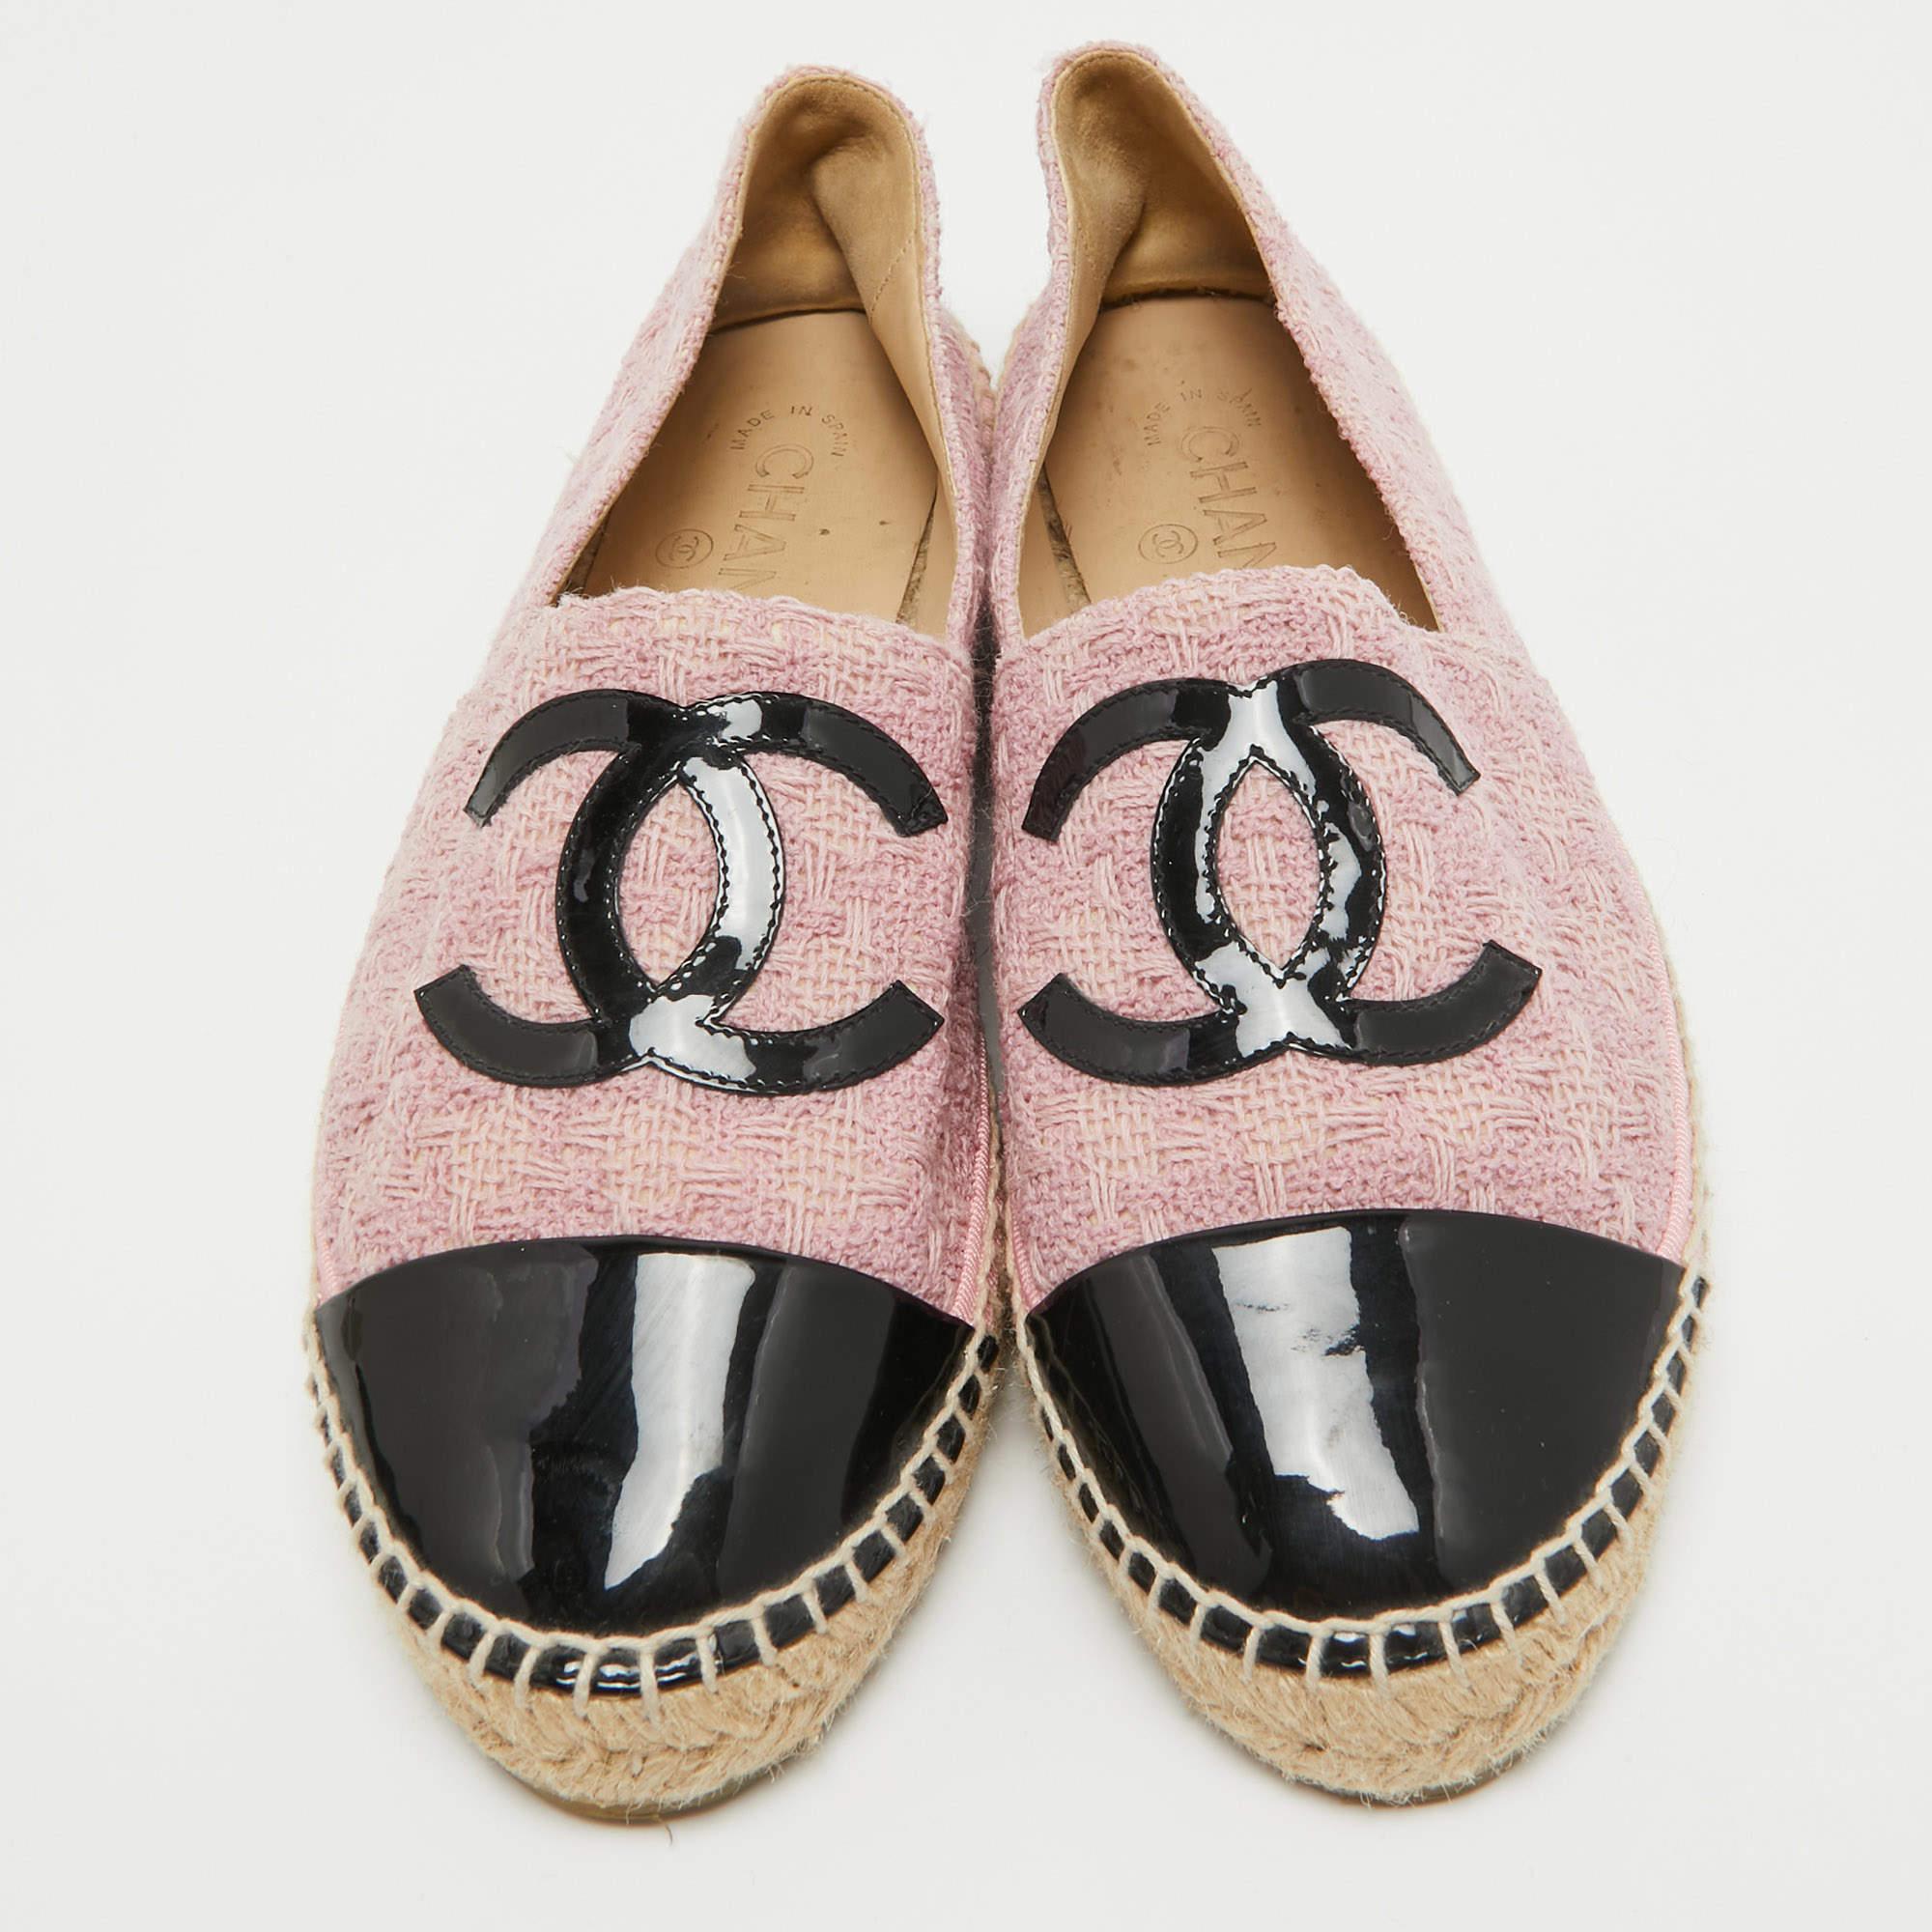 These shoes by Chanel will be your favorite go-to pair for off-duty looks. Crafted using tweed & patent leather, the espadrille flats have cap toes, CC logo details, and rubber soles.


Includes
Original Dustbag